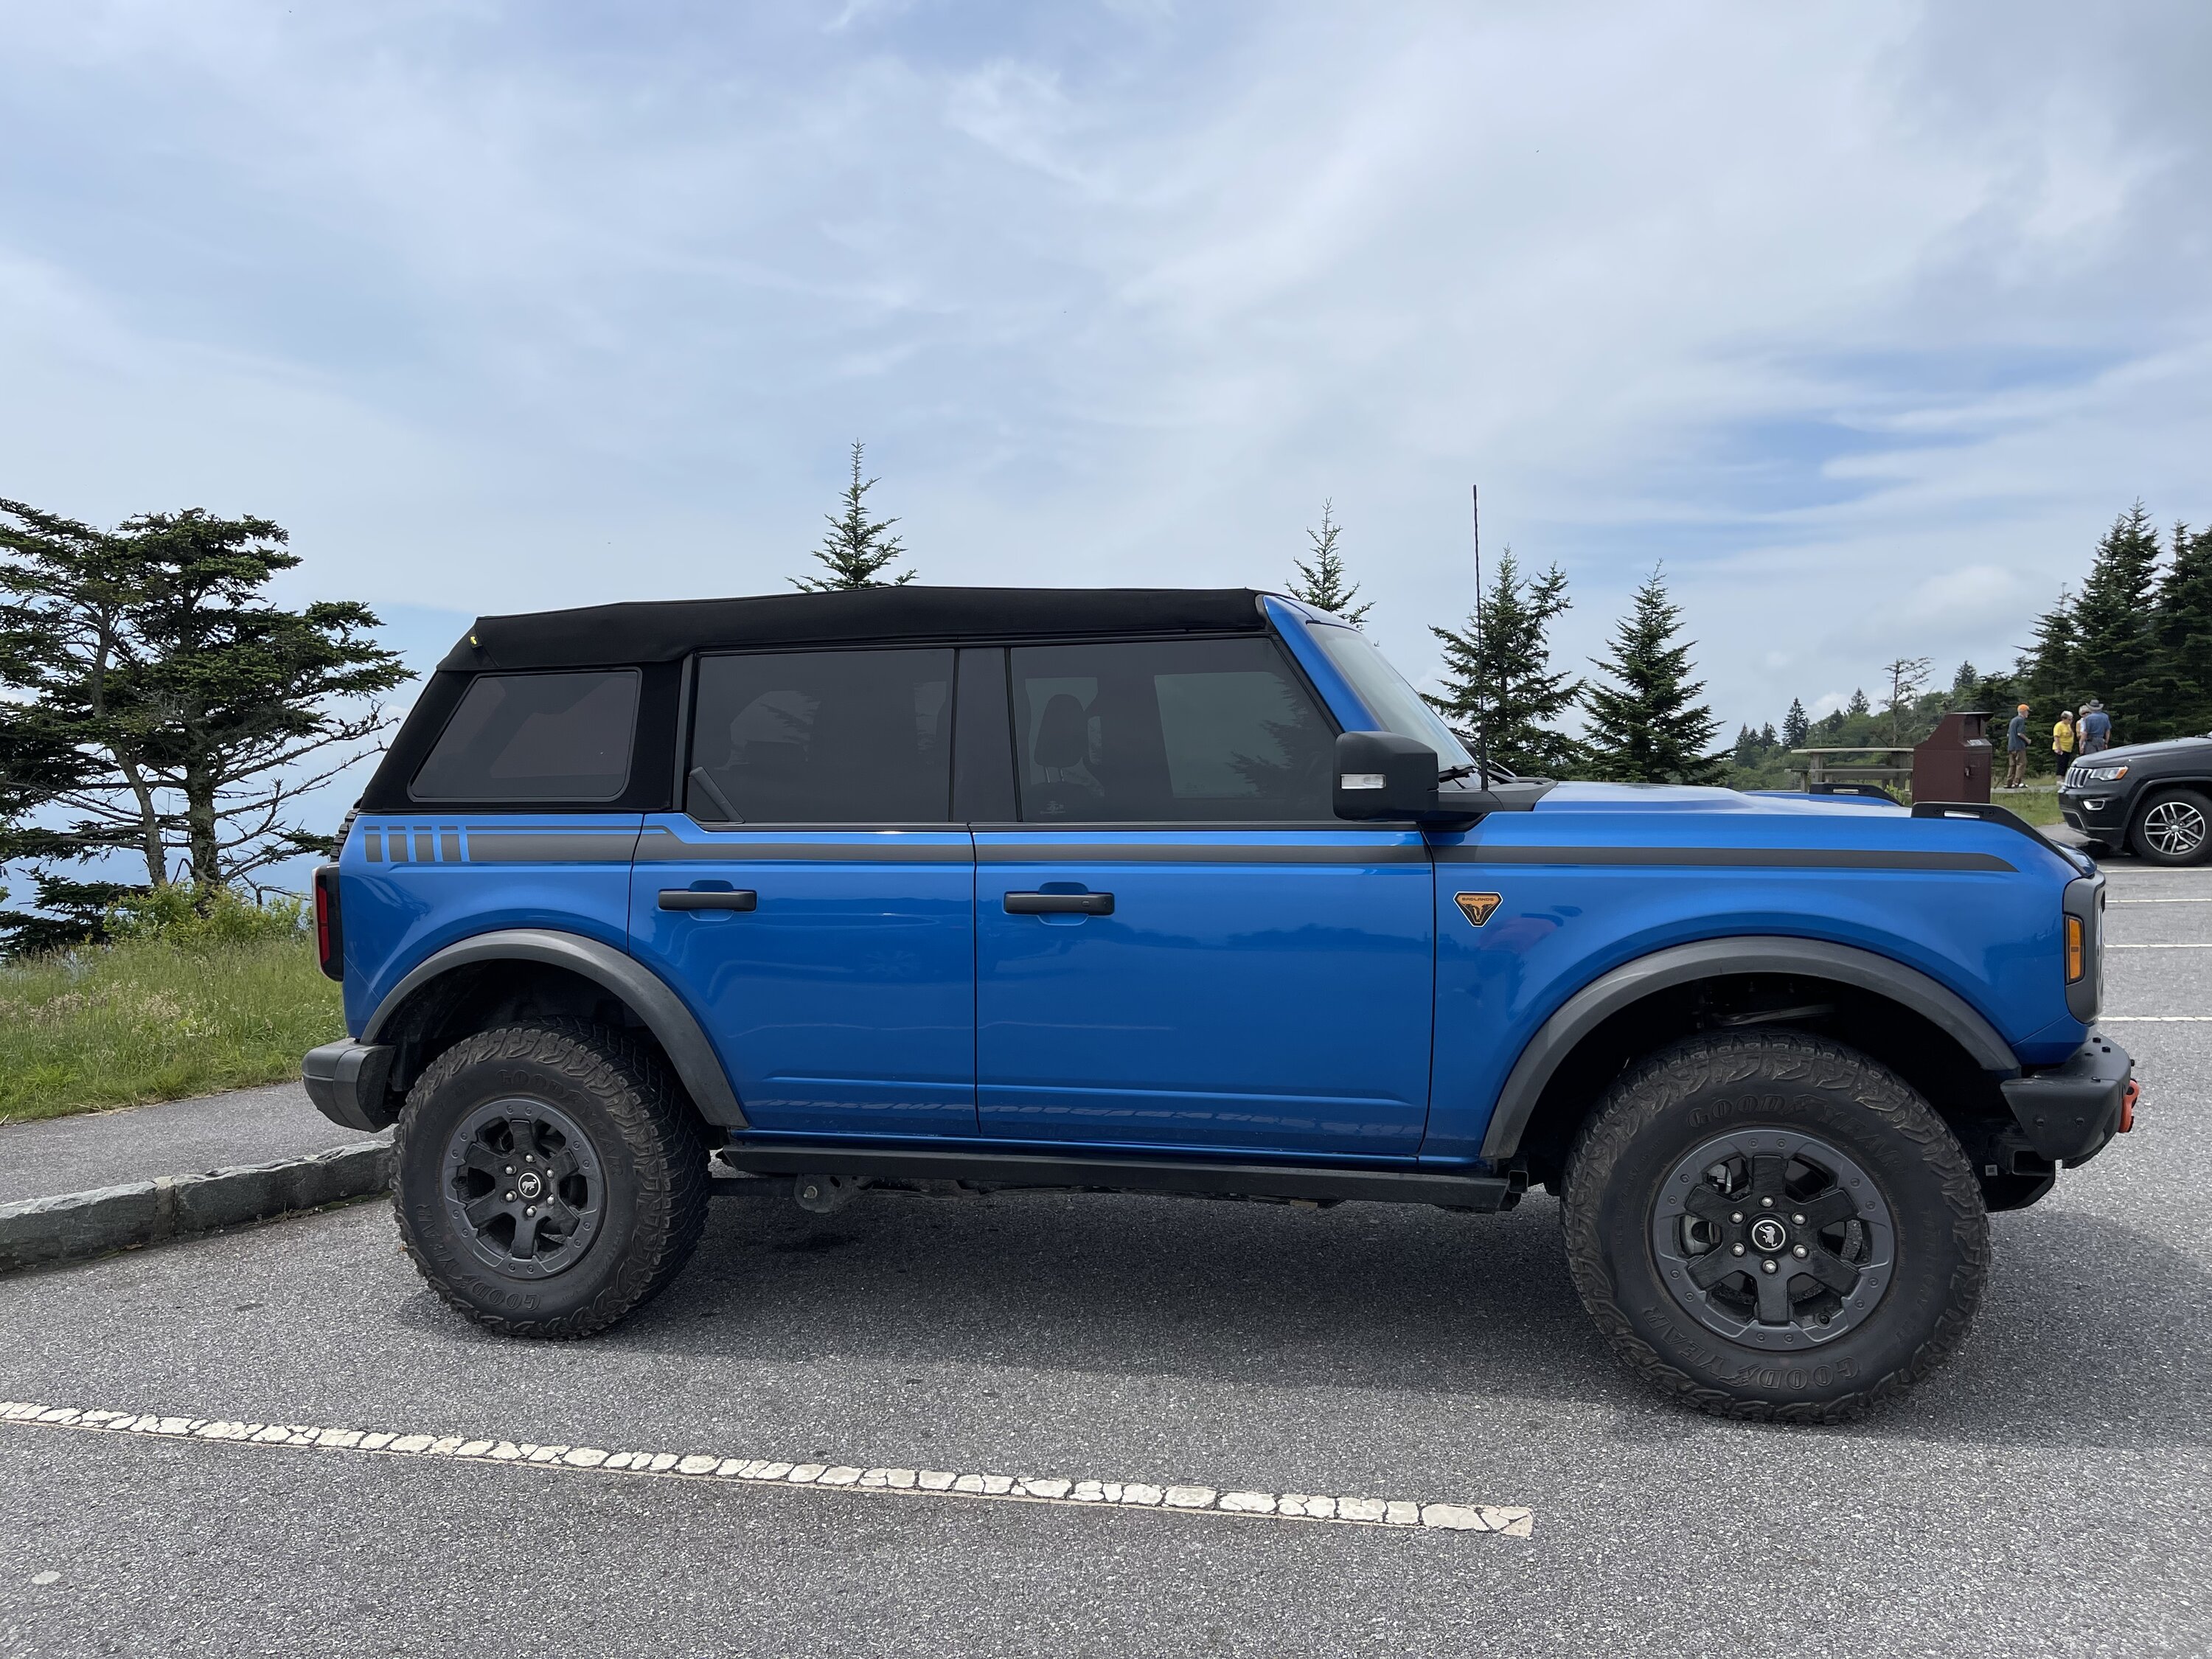 Ford Bronco Bestop Trektop Slantback Soft Top (Replaced Factory Soft Top)- Great!! .. Love it!! .. but be careful.. Pros & Cons Review D0367858-5A3F-4722-86E4-70ECD05415D4